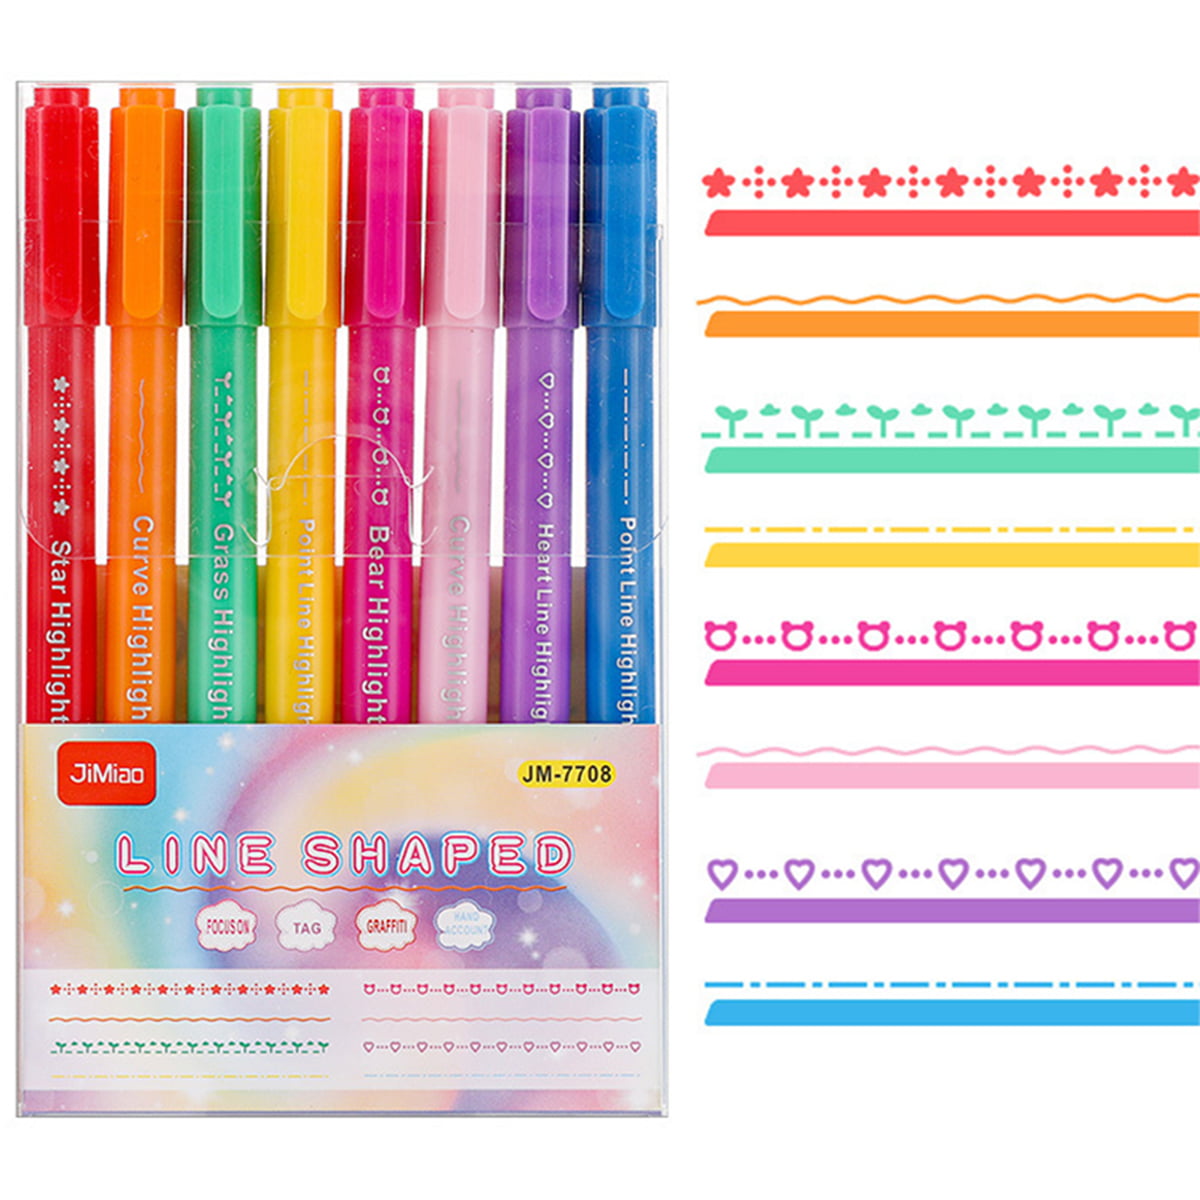 KLASSYWORLD Designer Linear Roller Curve Highlighter Pens  Set, 6 Colored - Cool Pens For Kids And Adults, Highlighter Pens For Study,  Book, Drawing, Office Use, Card-decorating (Multicolor)